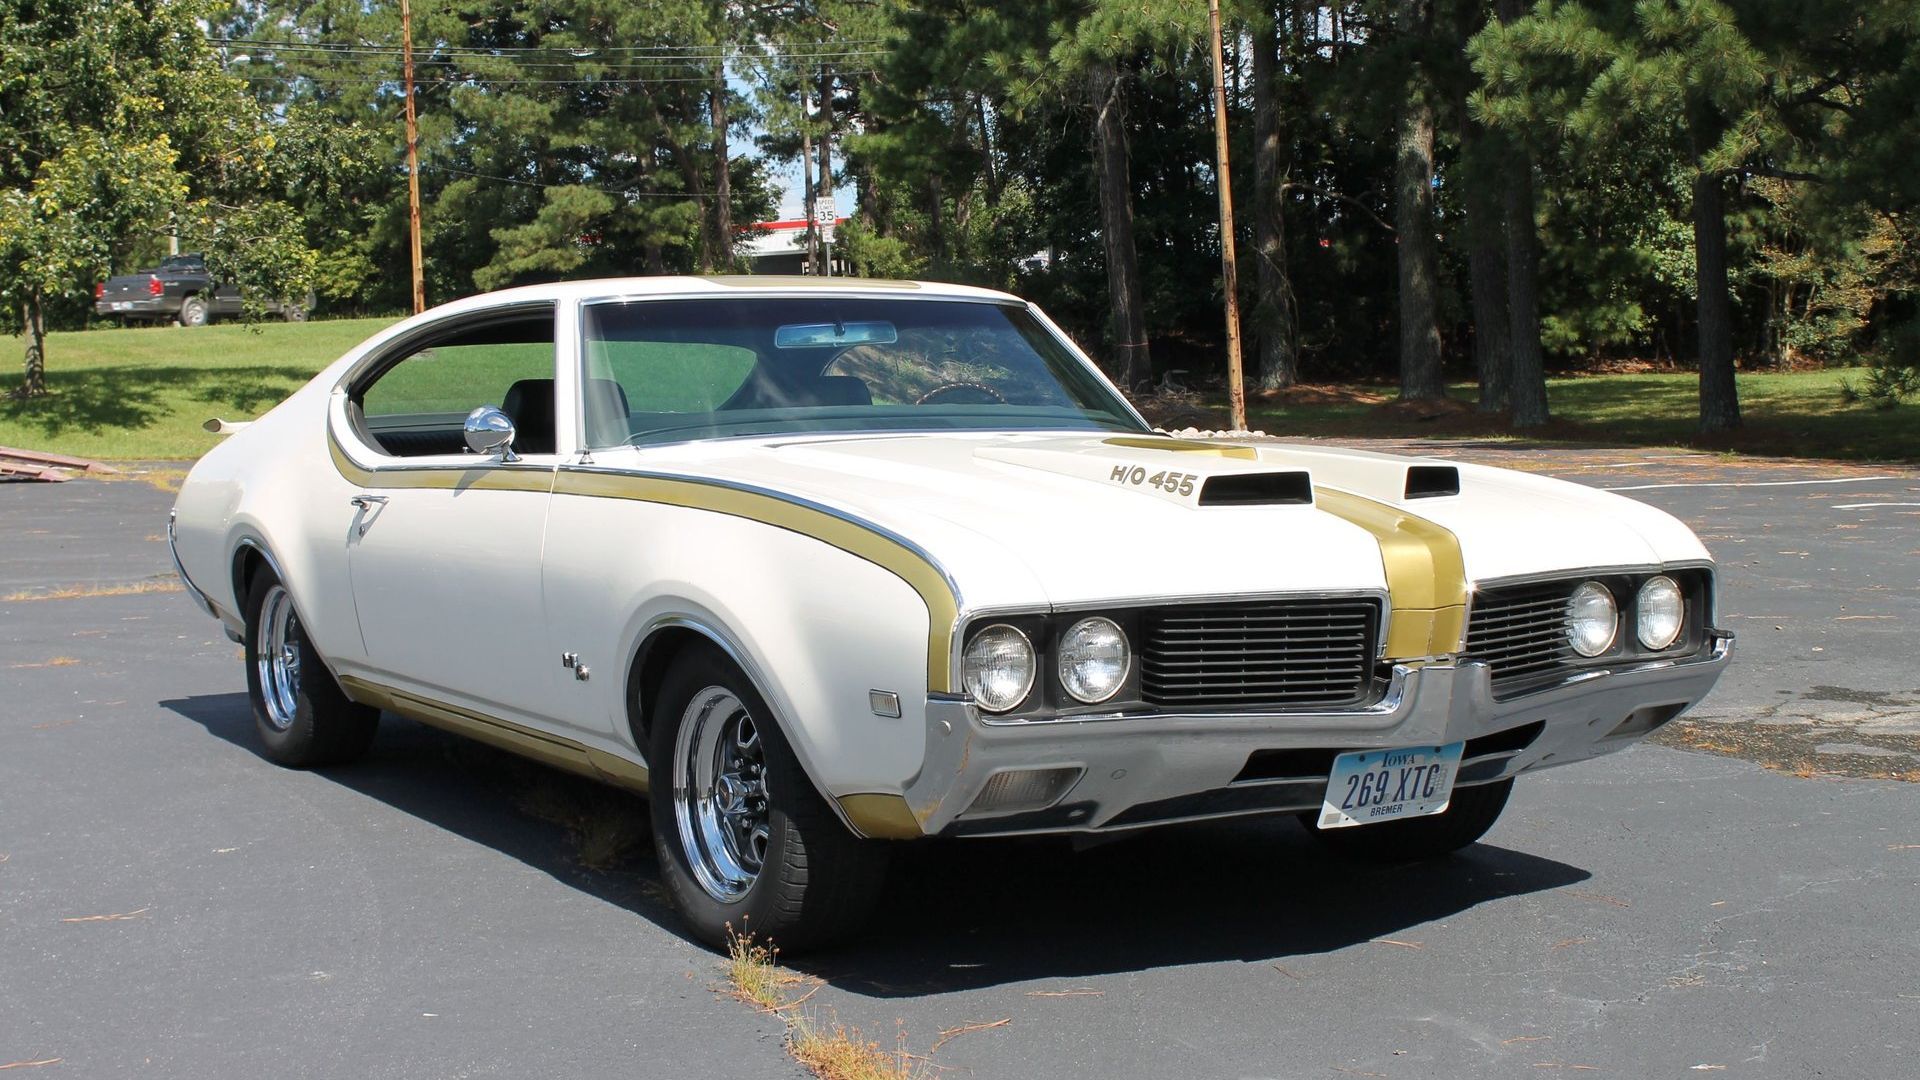 1969 Hurst/Oldsmobile 442 Is Exclusive American Muscle.